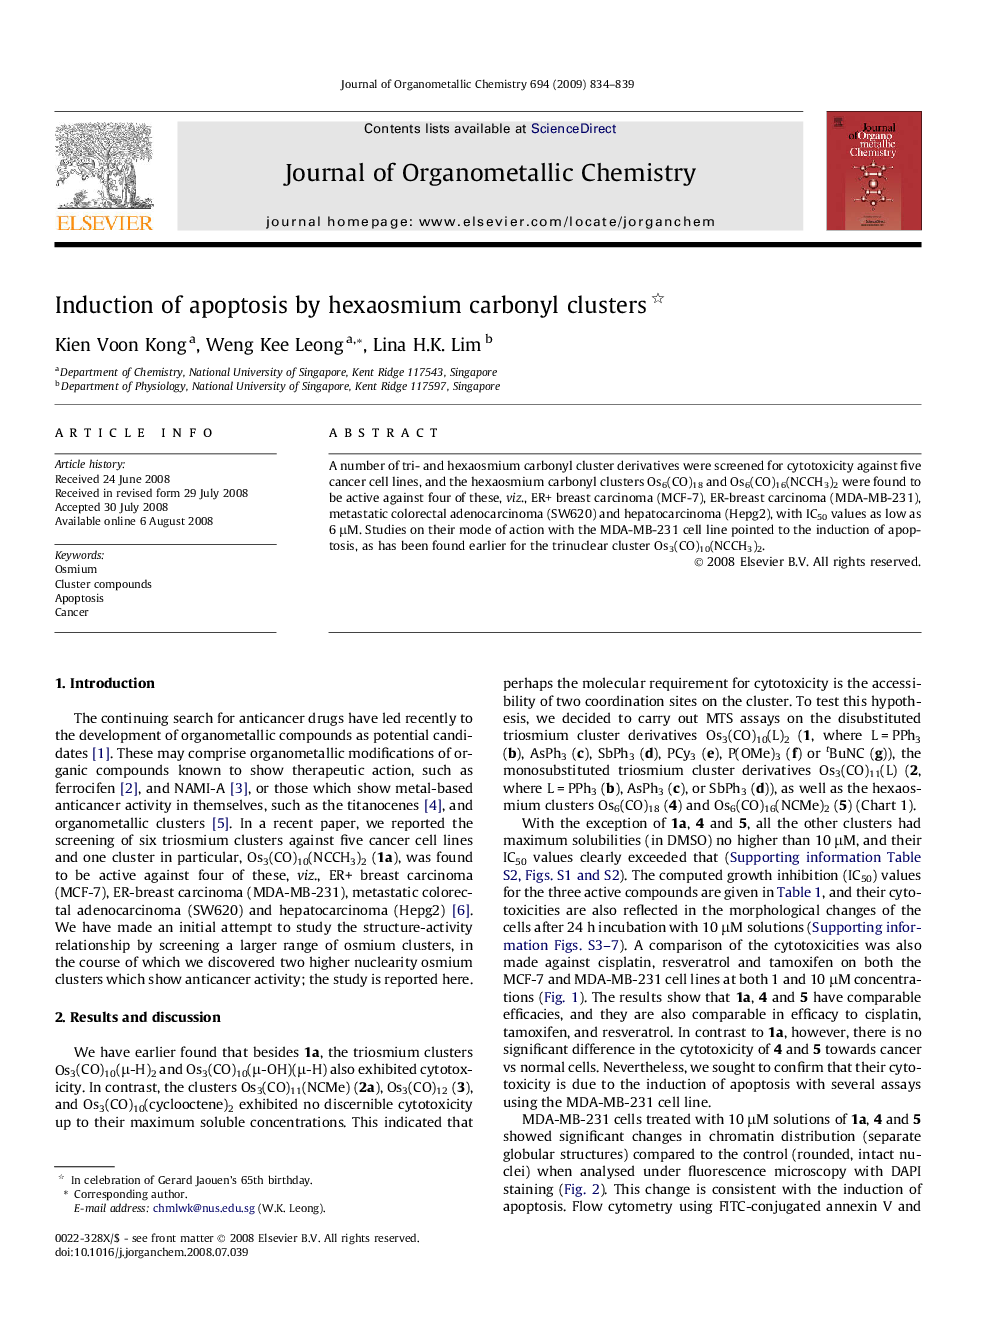 Induction of apoptosis by hexaosmium carbonyl clusters 